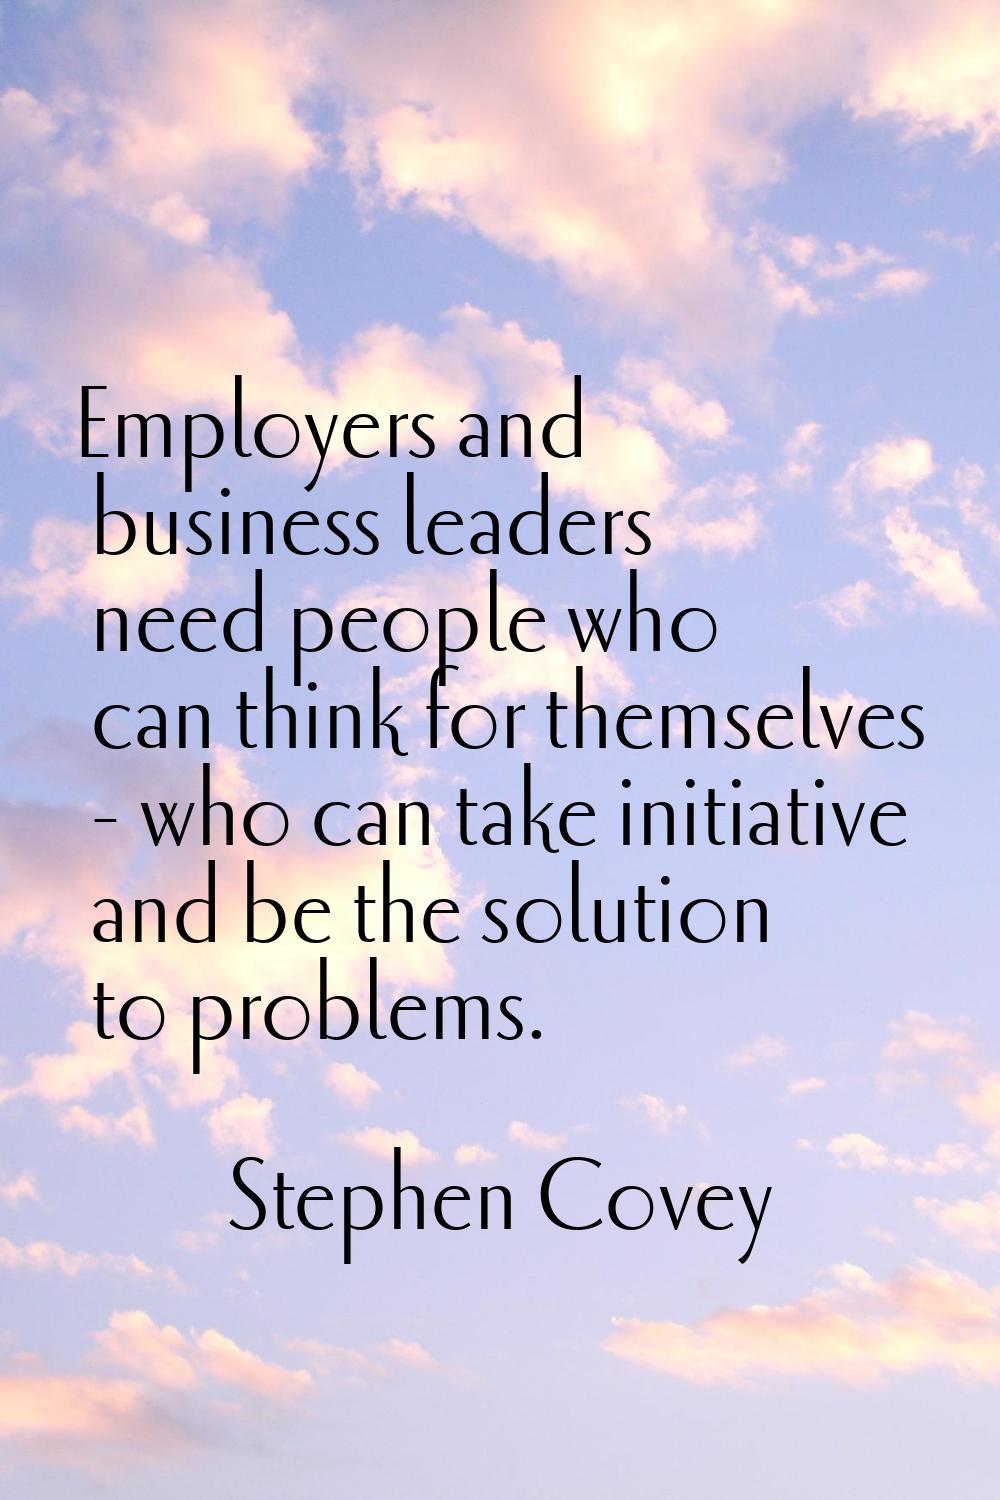 Employers and business leaders need people who can think for themselves - who can take initiative a